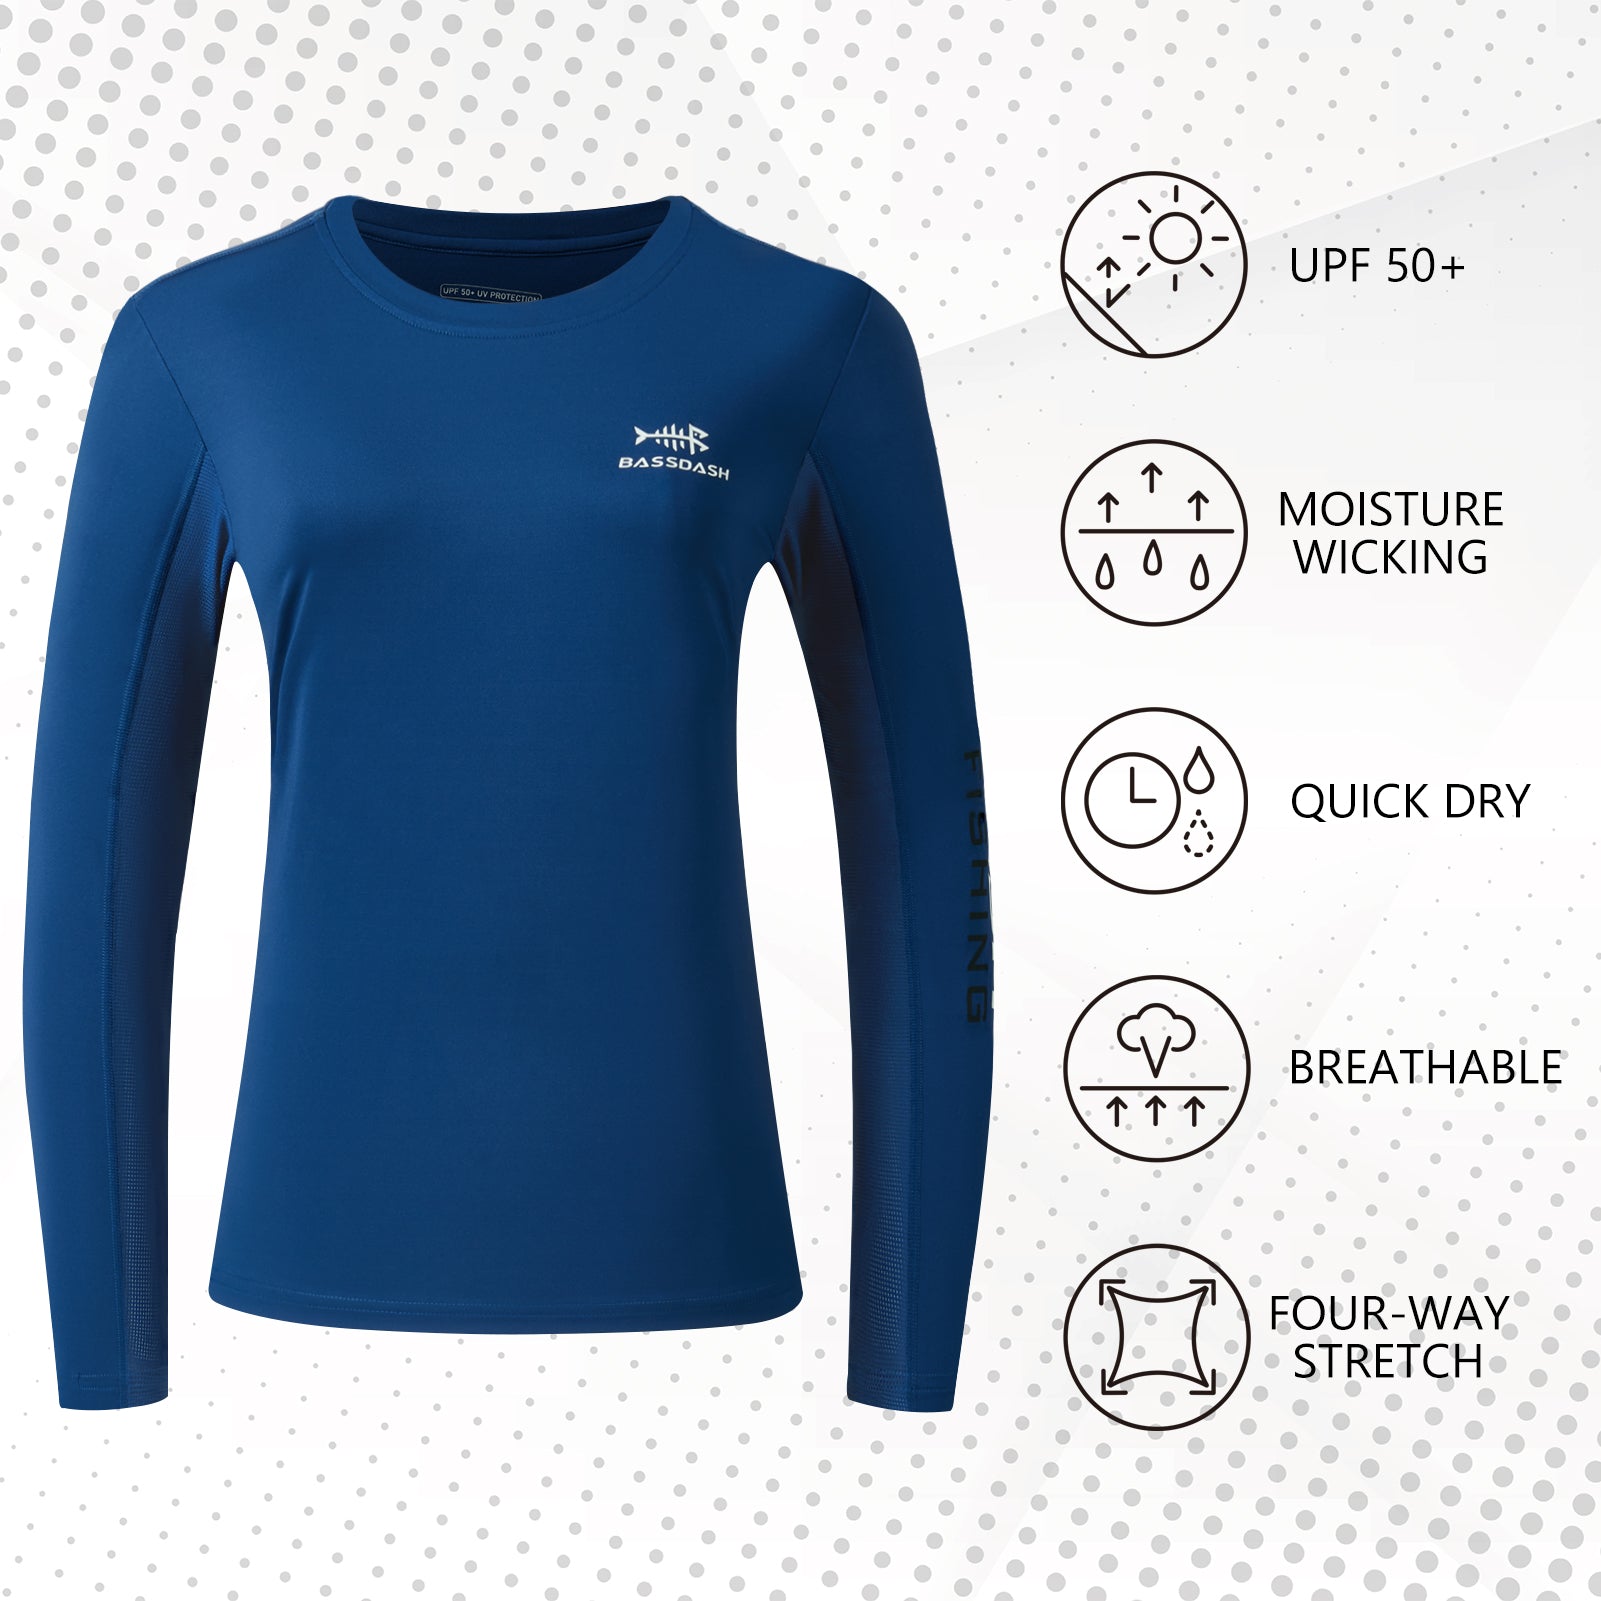 Buy Womens UPF 50+ UV Sun Protection Clothing Long Sleeve SPF Shirts Zip Up  Athletic Hiking Jakcet Outdoor Lightweight, Blue, Small at